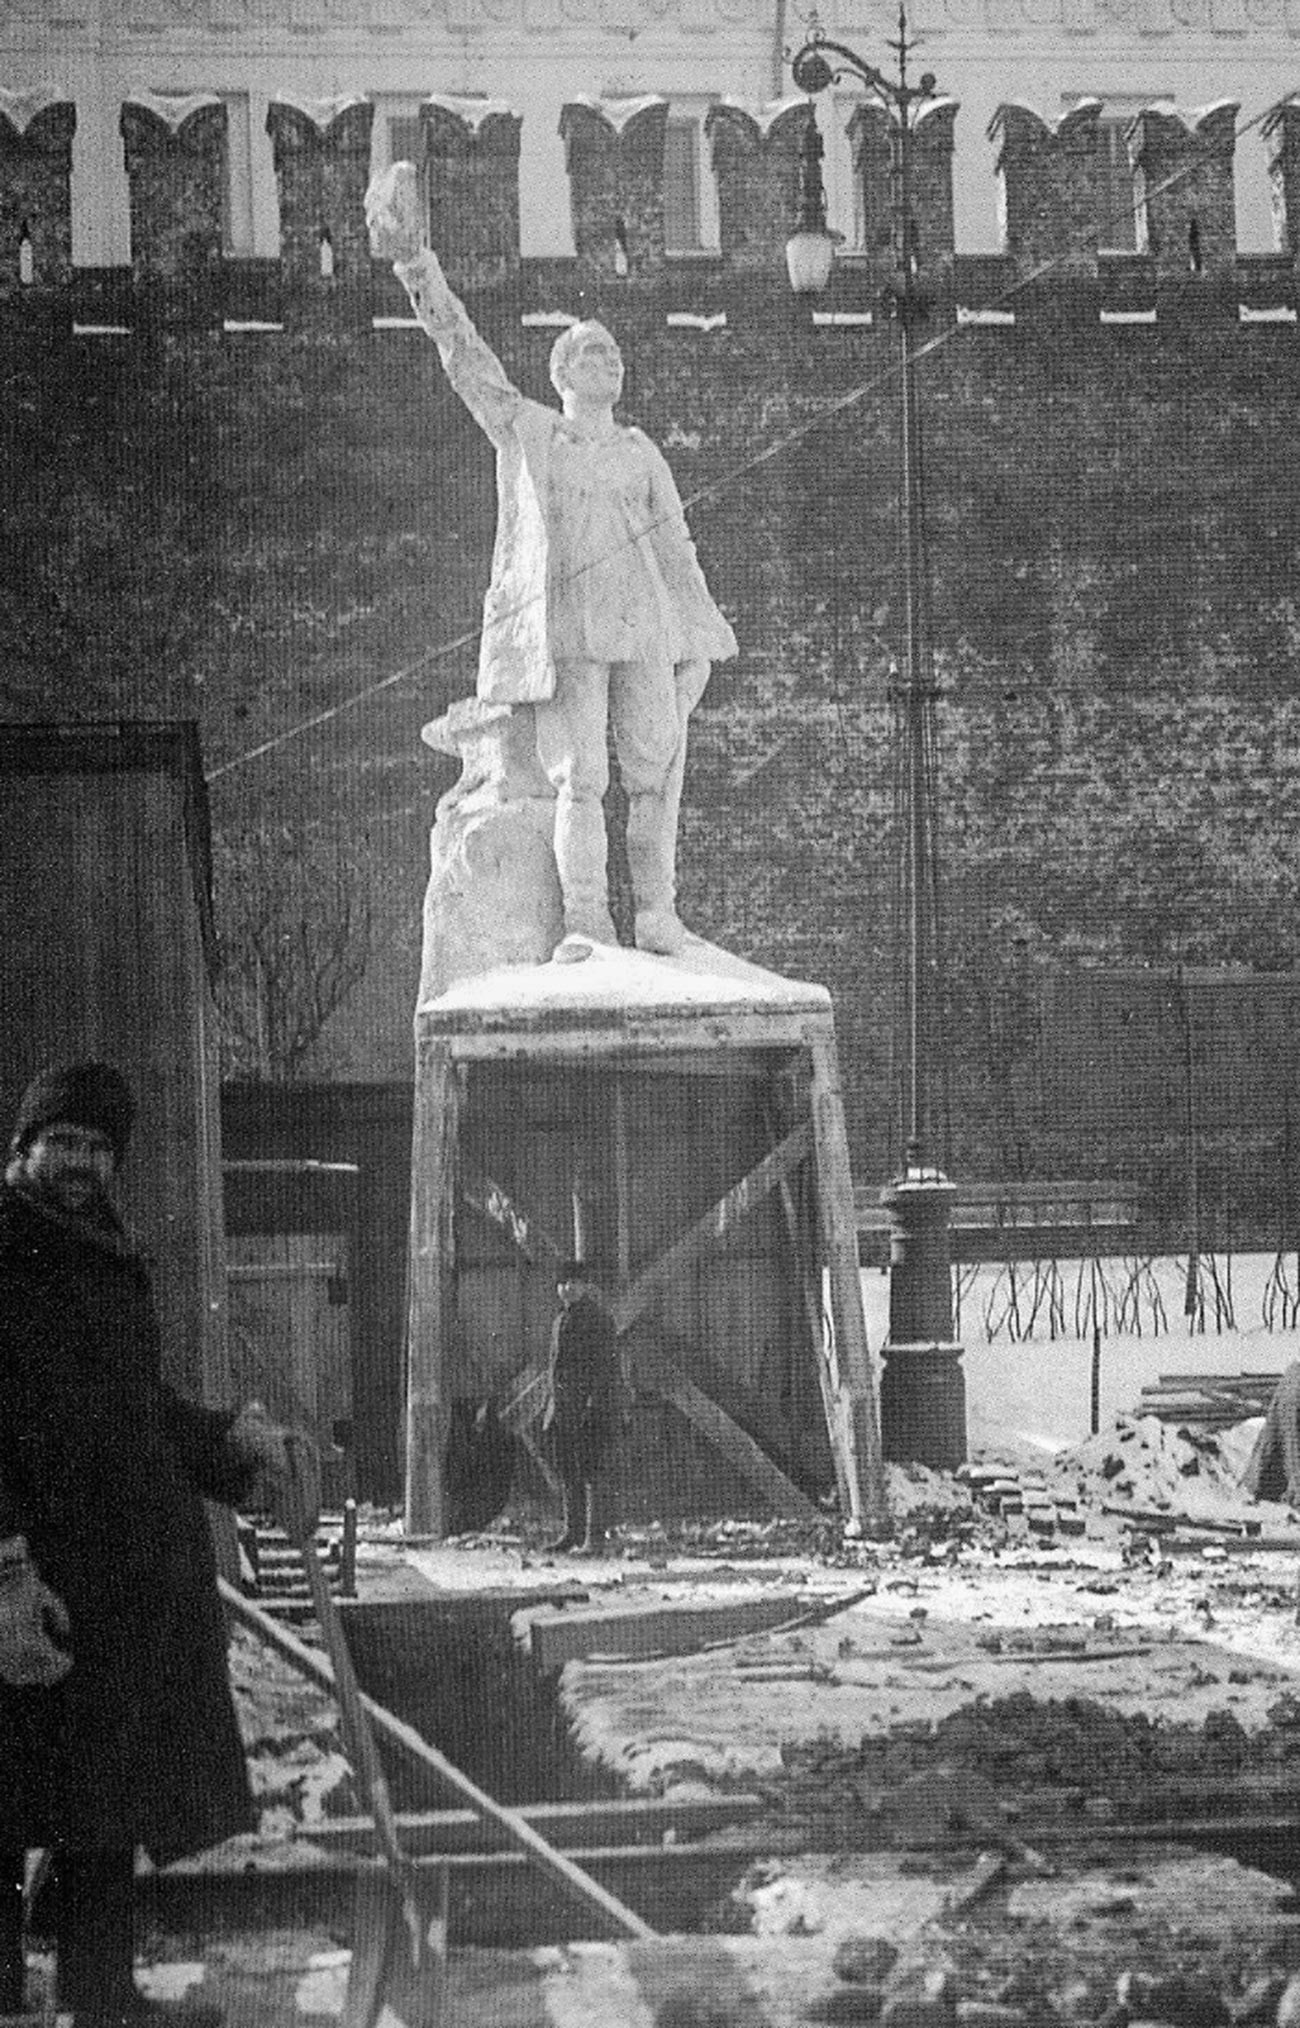 The monument to a worker before its demolition.